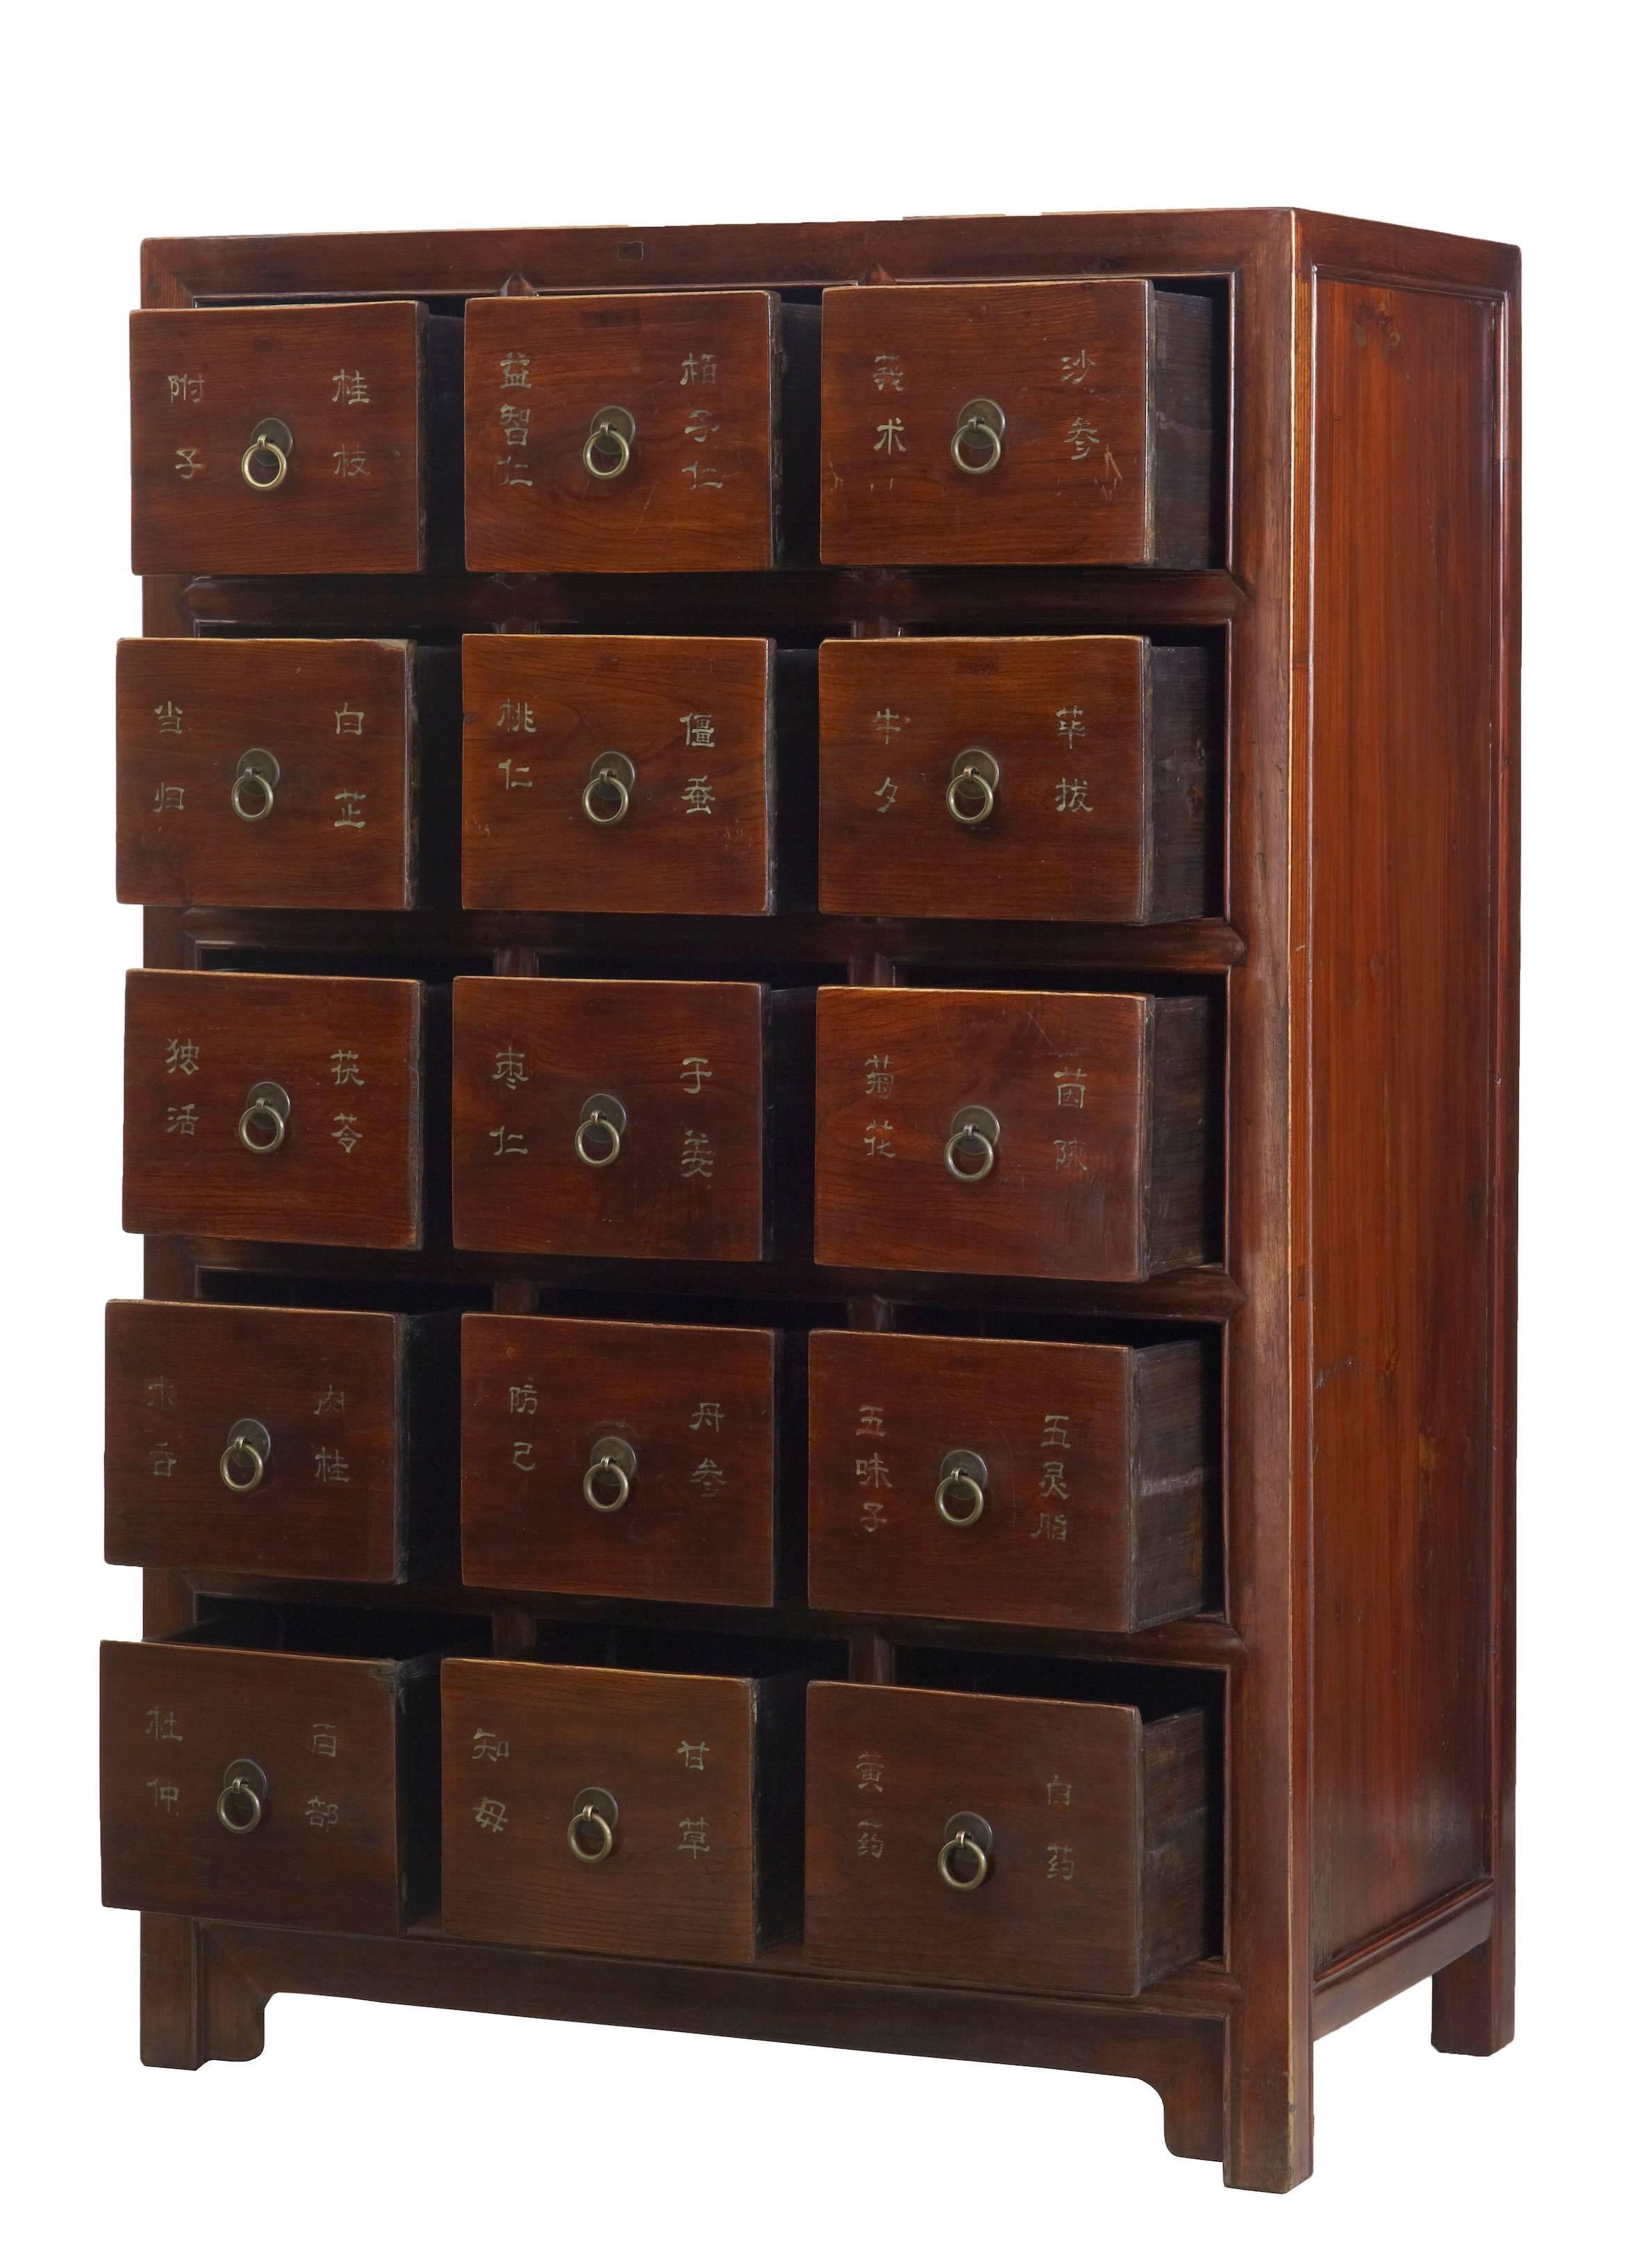 Lacquered chest of drawers, circa 1920.
15 drawers with hand-painted Chinese lettering.
Brass ringed handles.
Light damage just above bottom middle drawer (photographed).

Measures: Height: 46